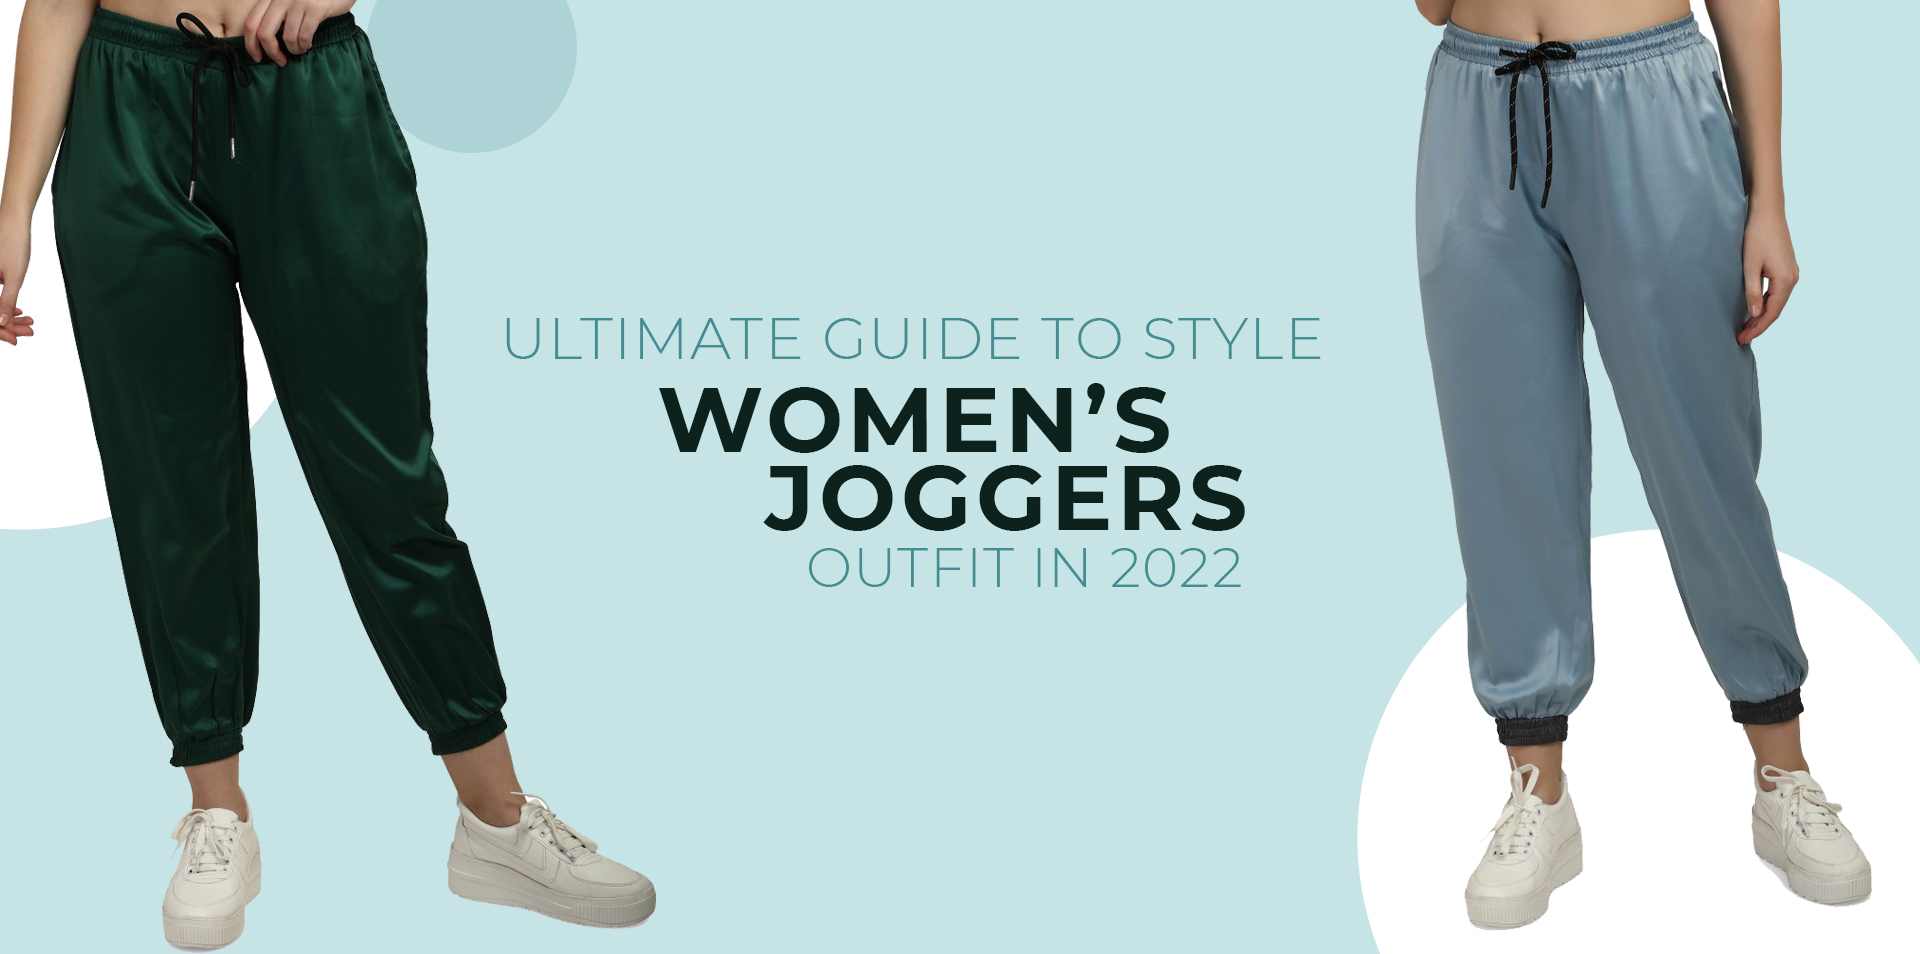  Ultimate Guide to Style Women’s Joggers outfit in 2022